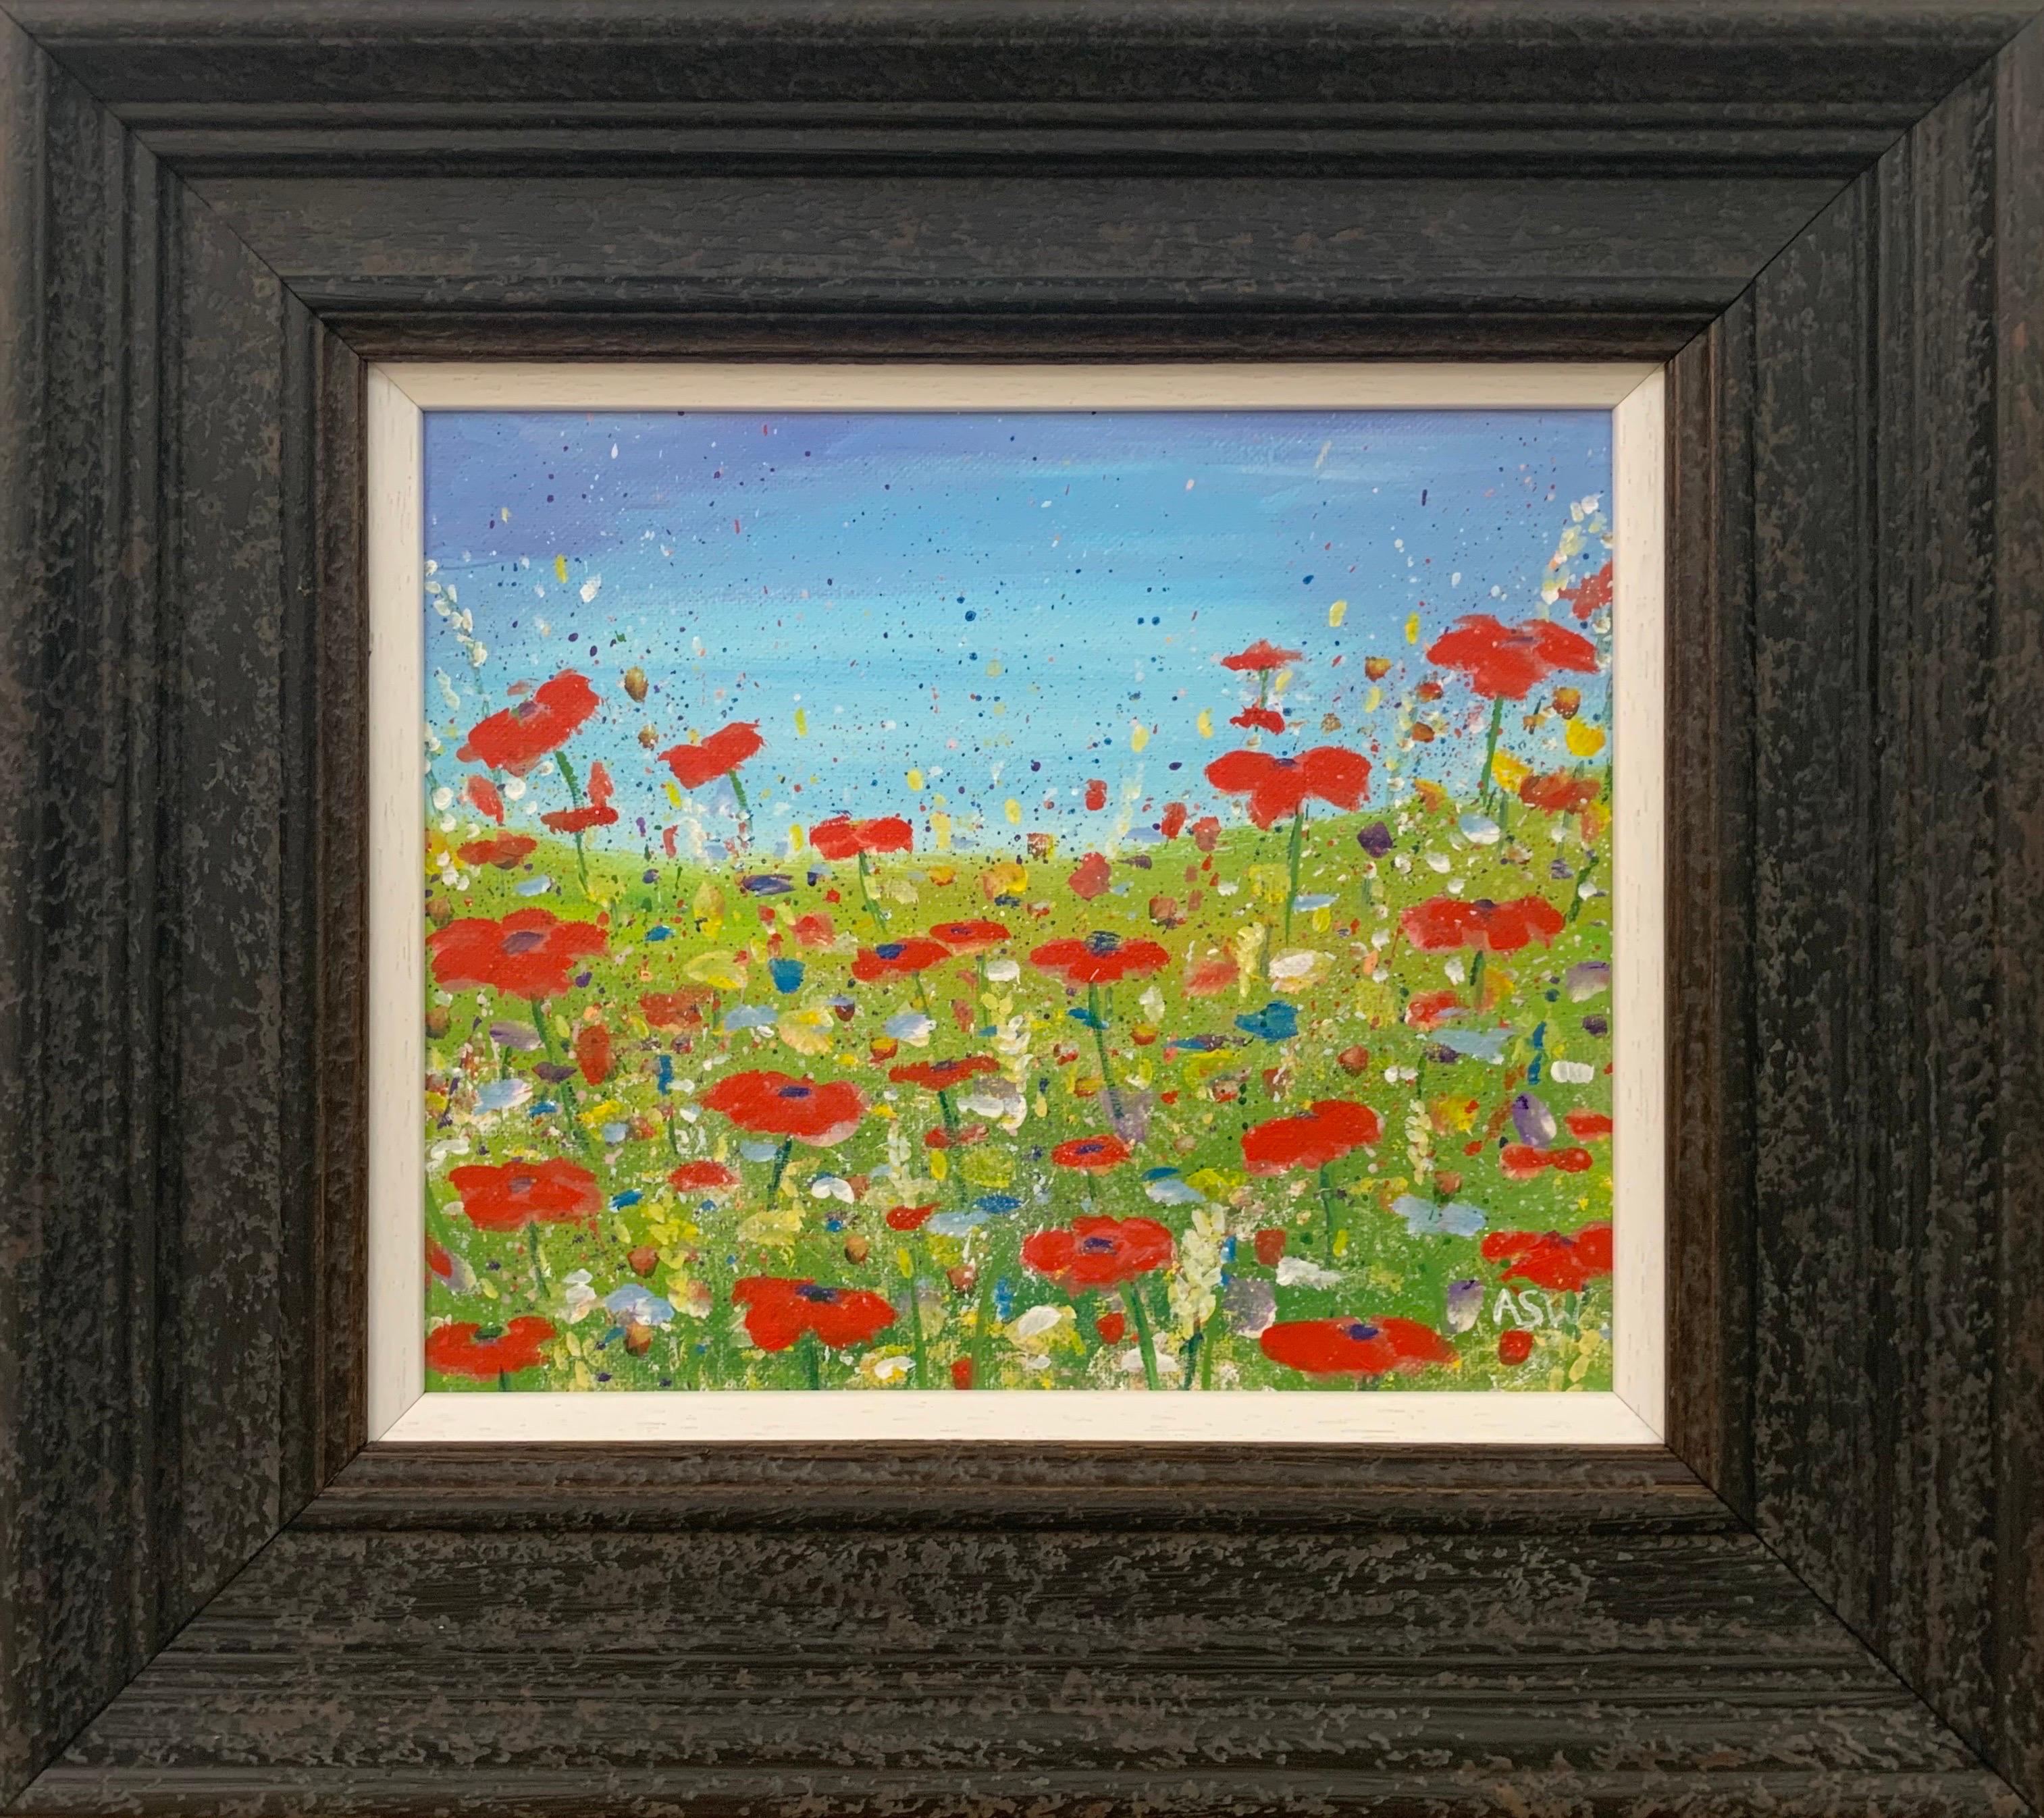 Angela Wakefield Still-Life Painting - Impressionistic Wild Red Flowers in an English Meadow by Contemporary Artist